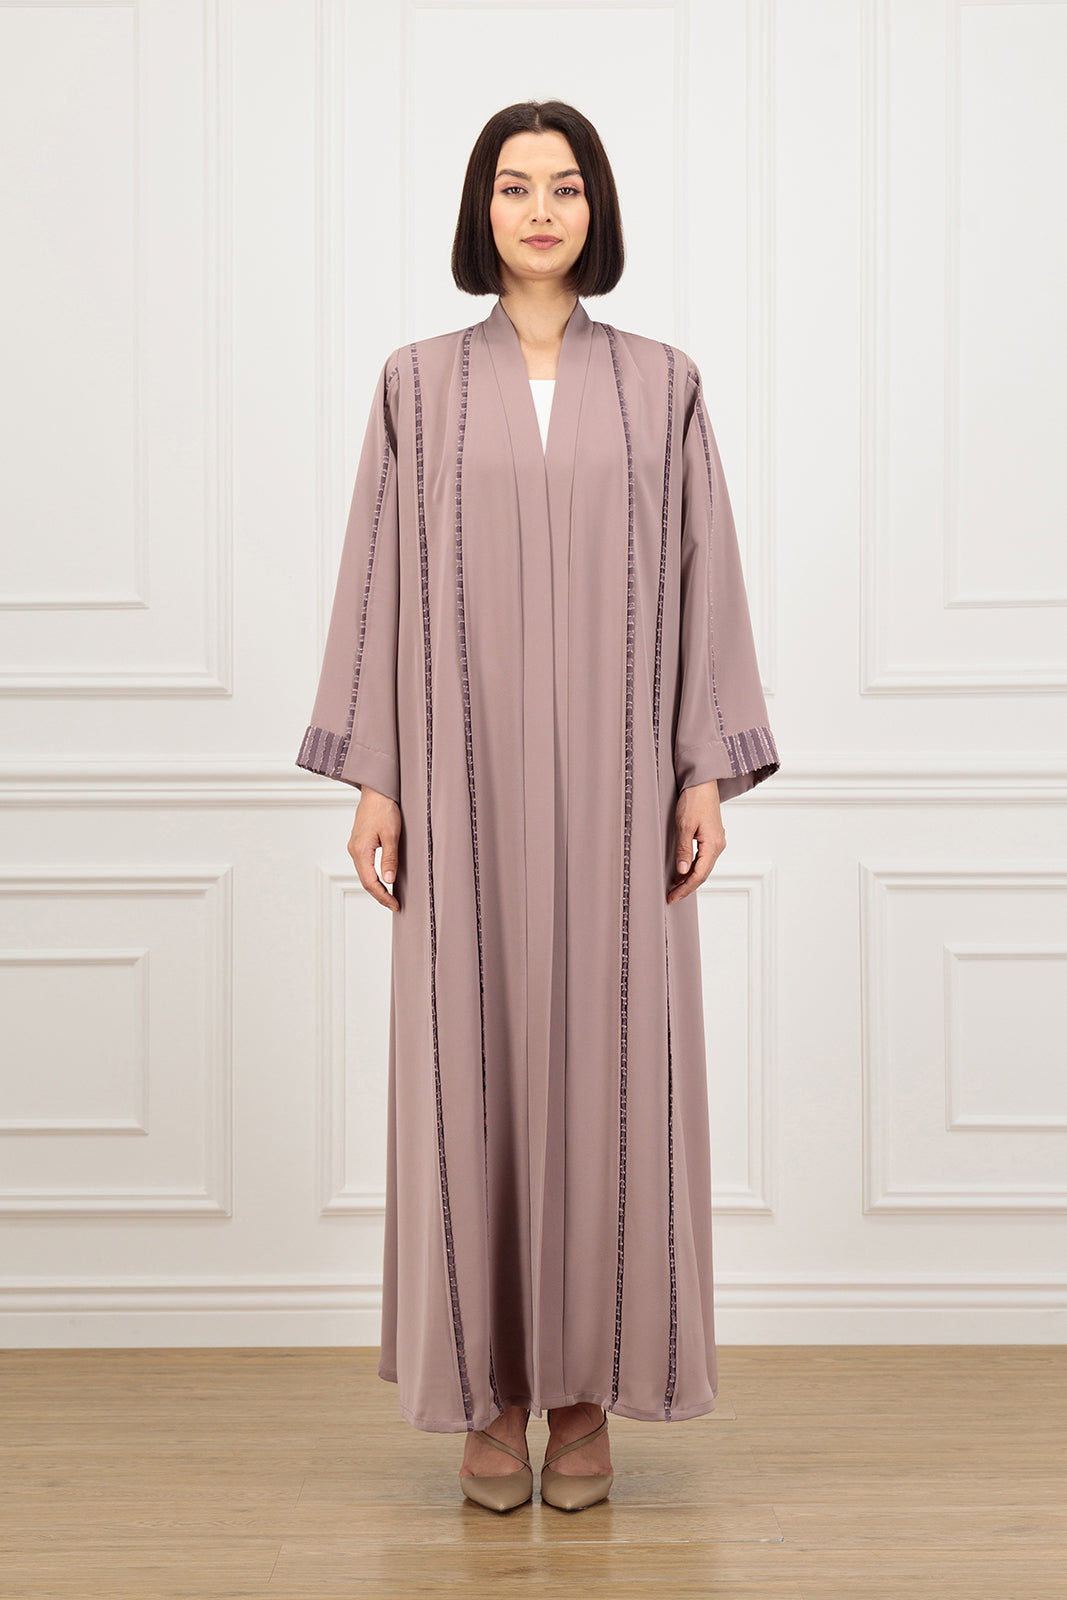 Abaya with textured piping on the front and sleeves